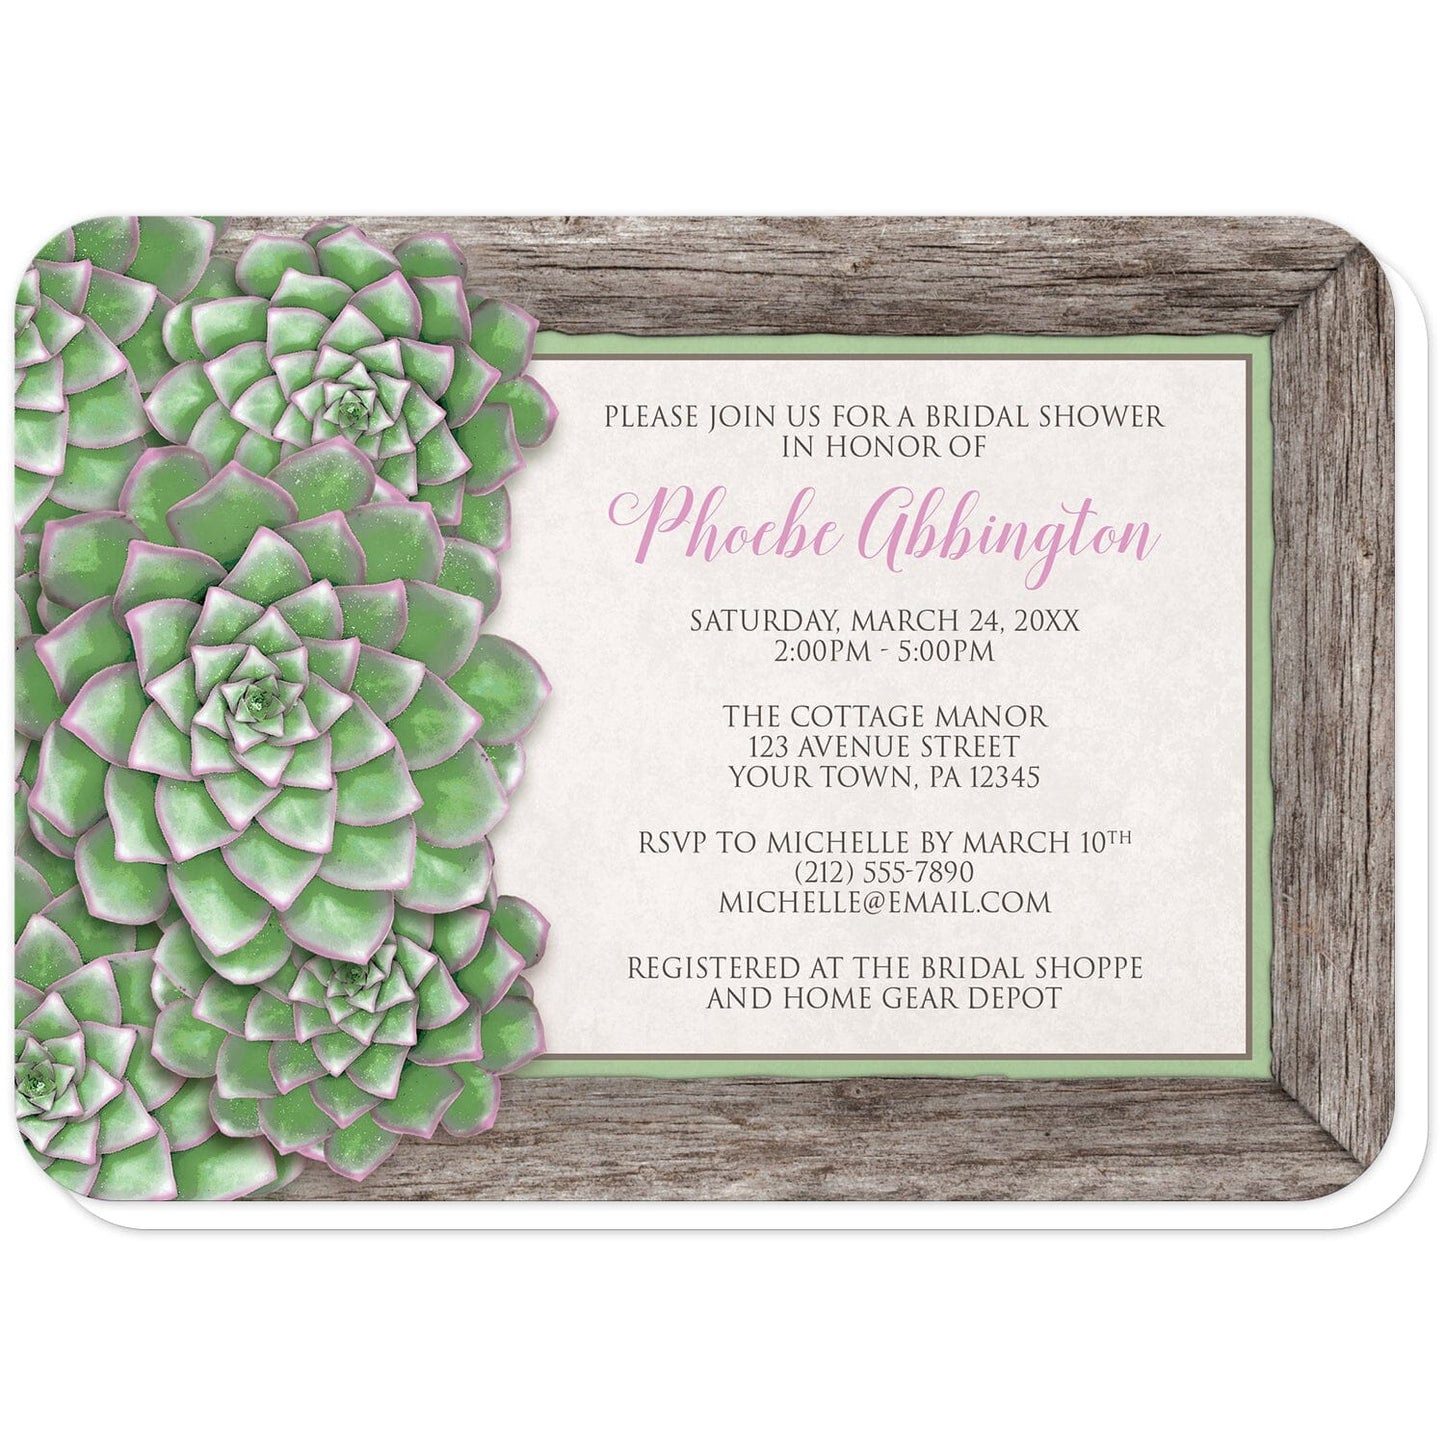 Green and Pink Succulent Wood Bridal Shower Invitations (with rounded corners) at Artistically Invited. Beautiful green and pink succulent wood bridal shower invitations with an arrangement of green succulents with pink tips along the left side of the invitations over a wooden frame border illustration. Your personalized bridal shower celebration details are custom printed in pink and brown over beige to the right of the succulents.